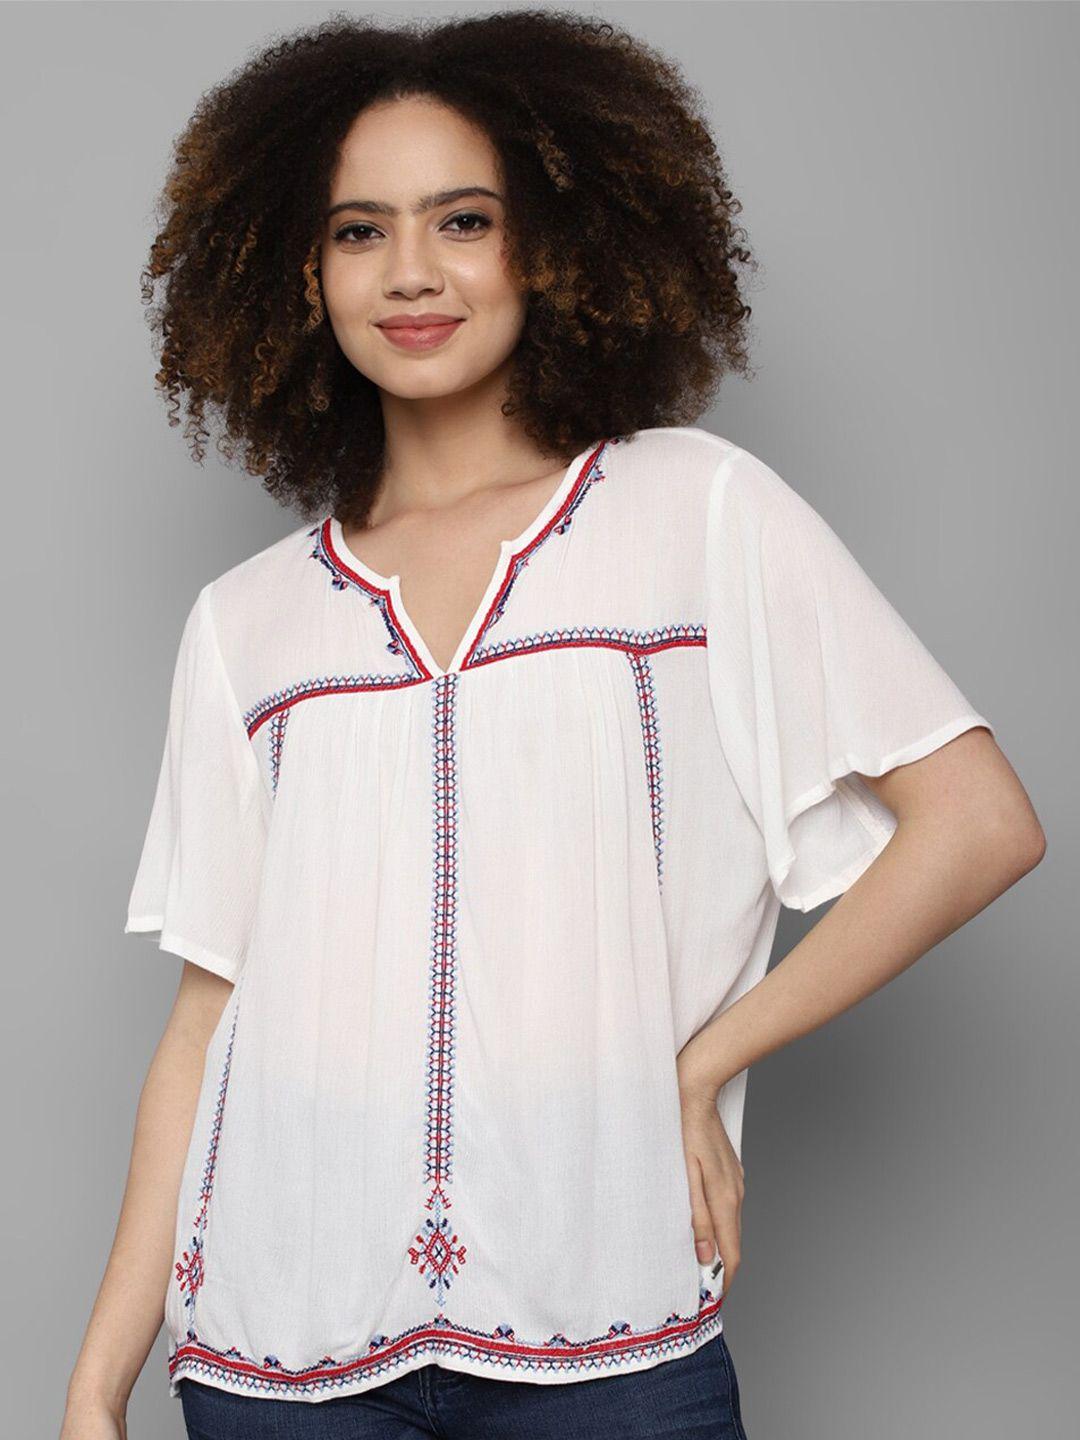 allen-solly-woman-white-flared-sleeves-top